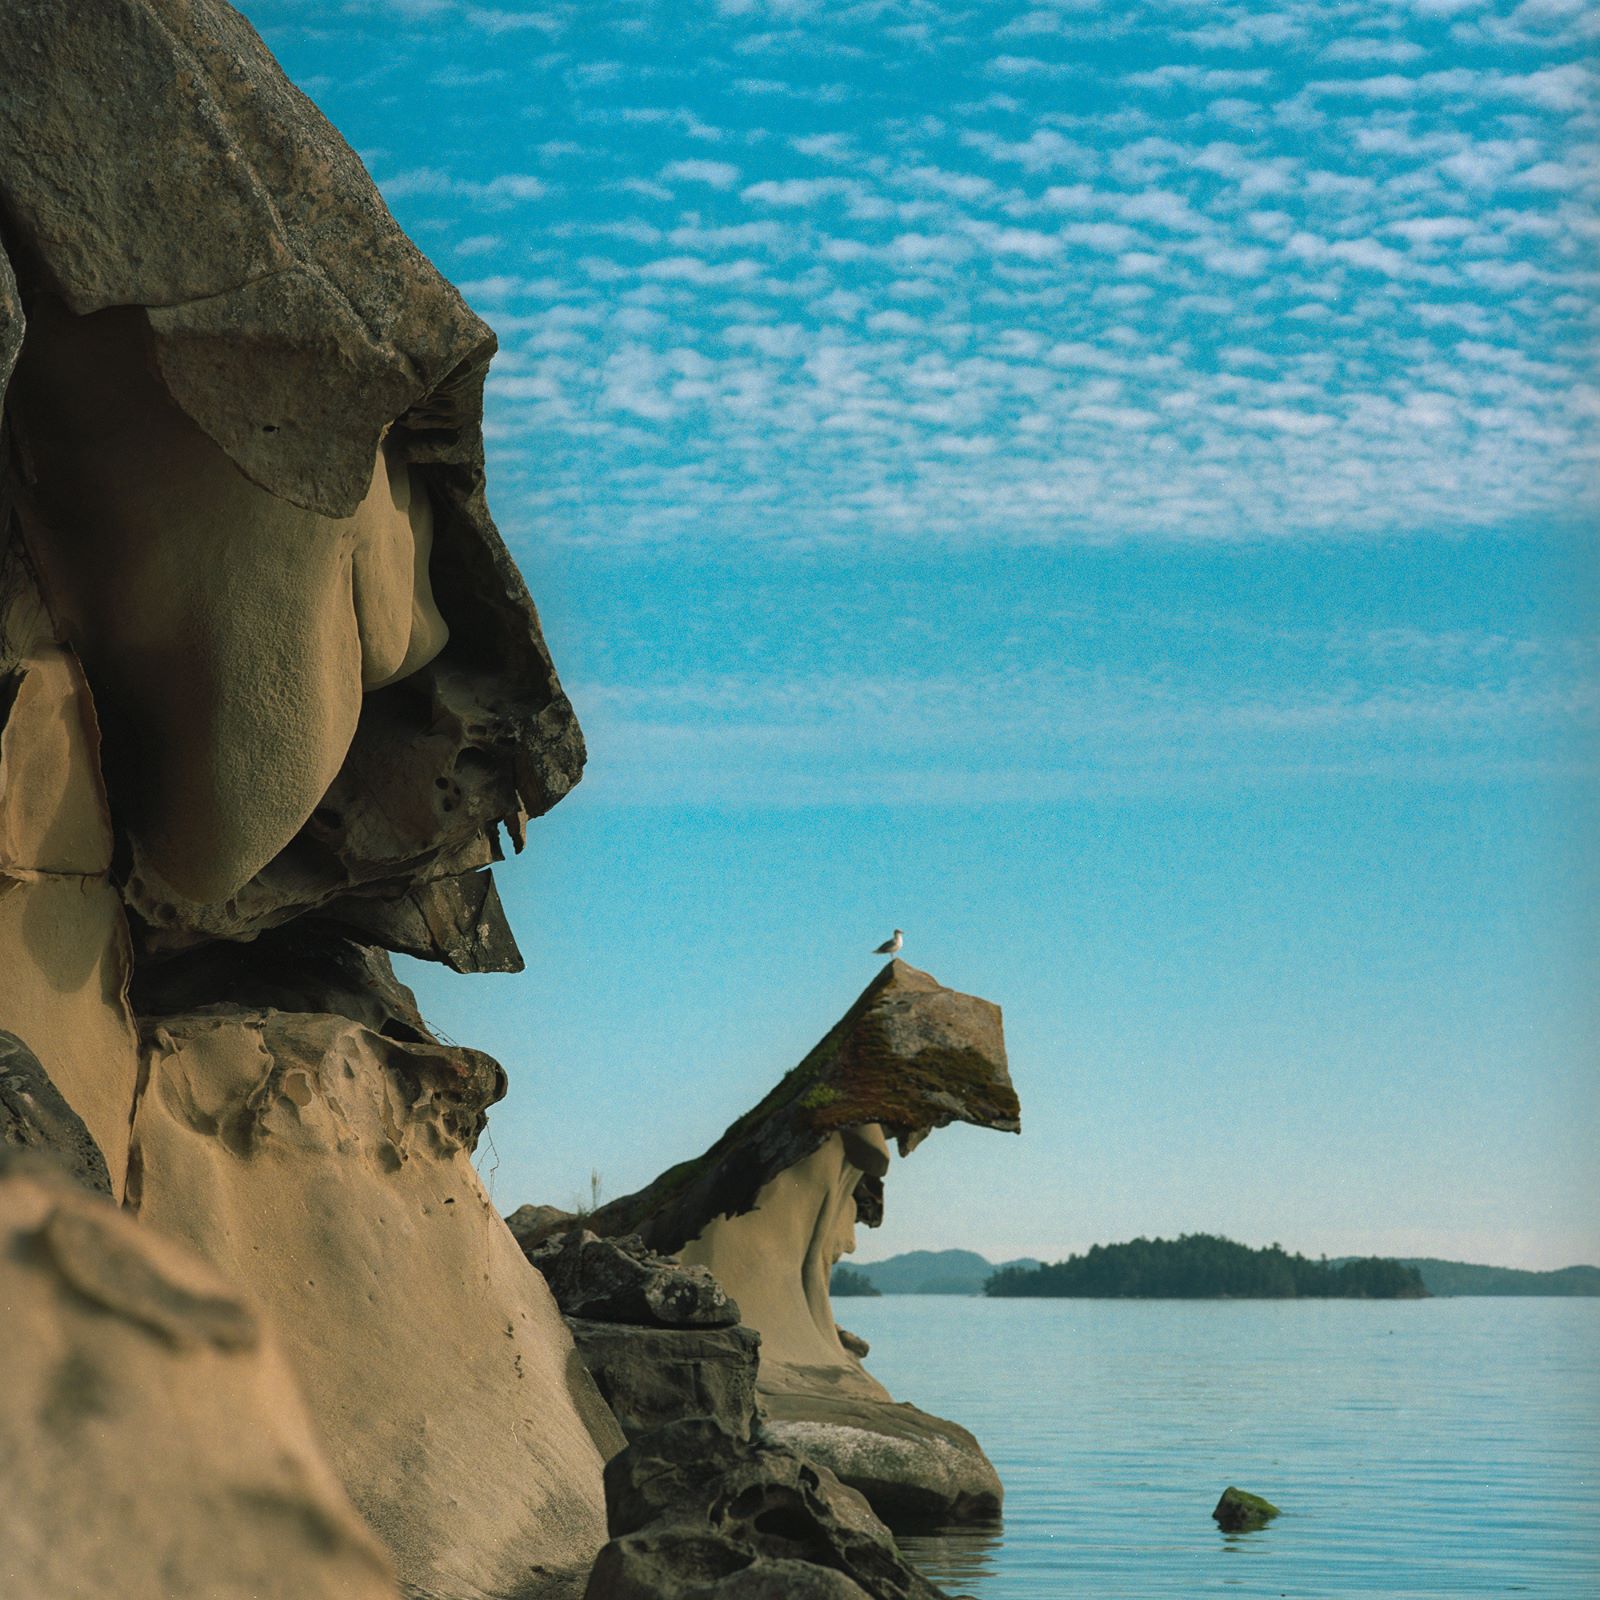 Steep sandstone shoreline with a profile of a human face against a bright blue sky